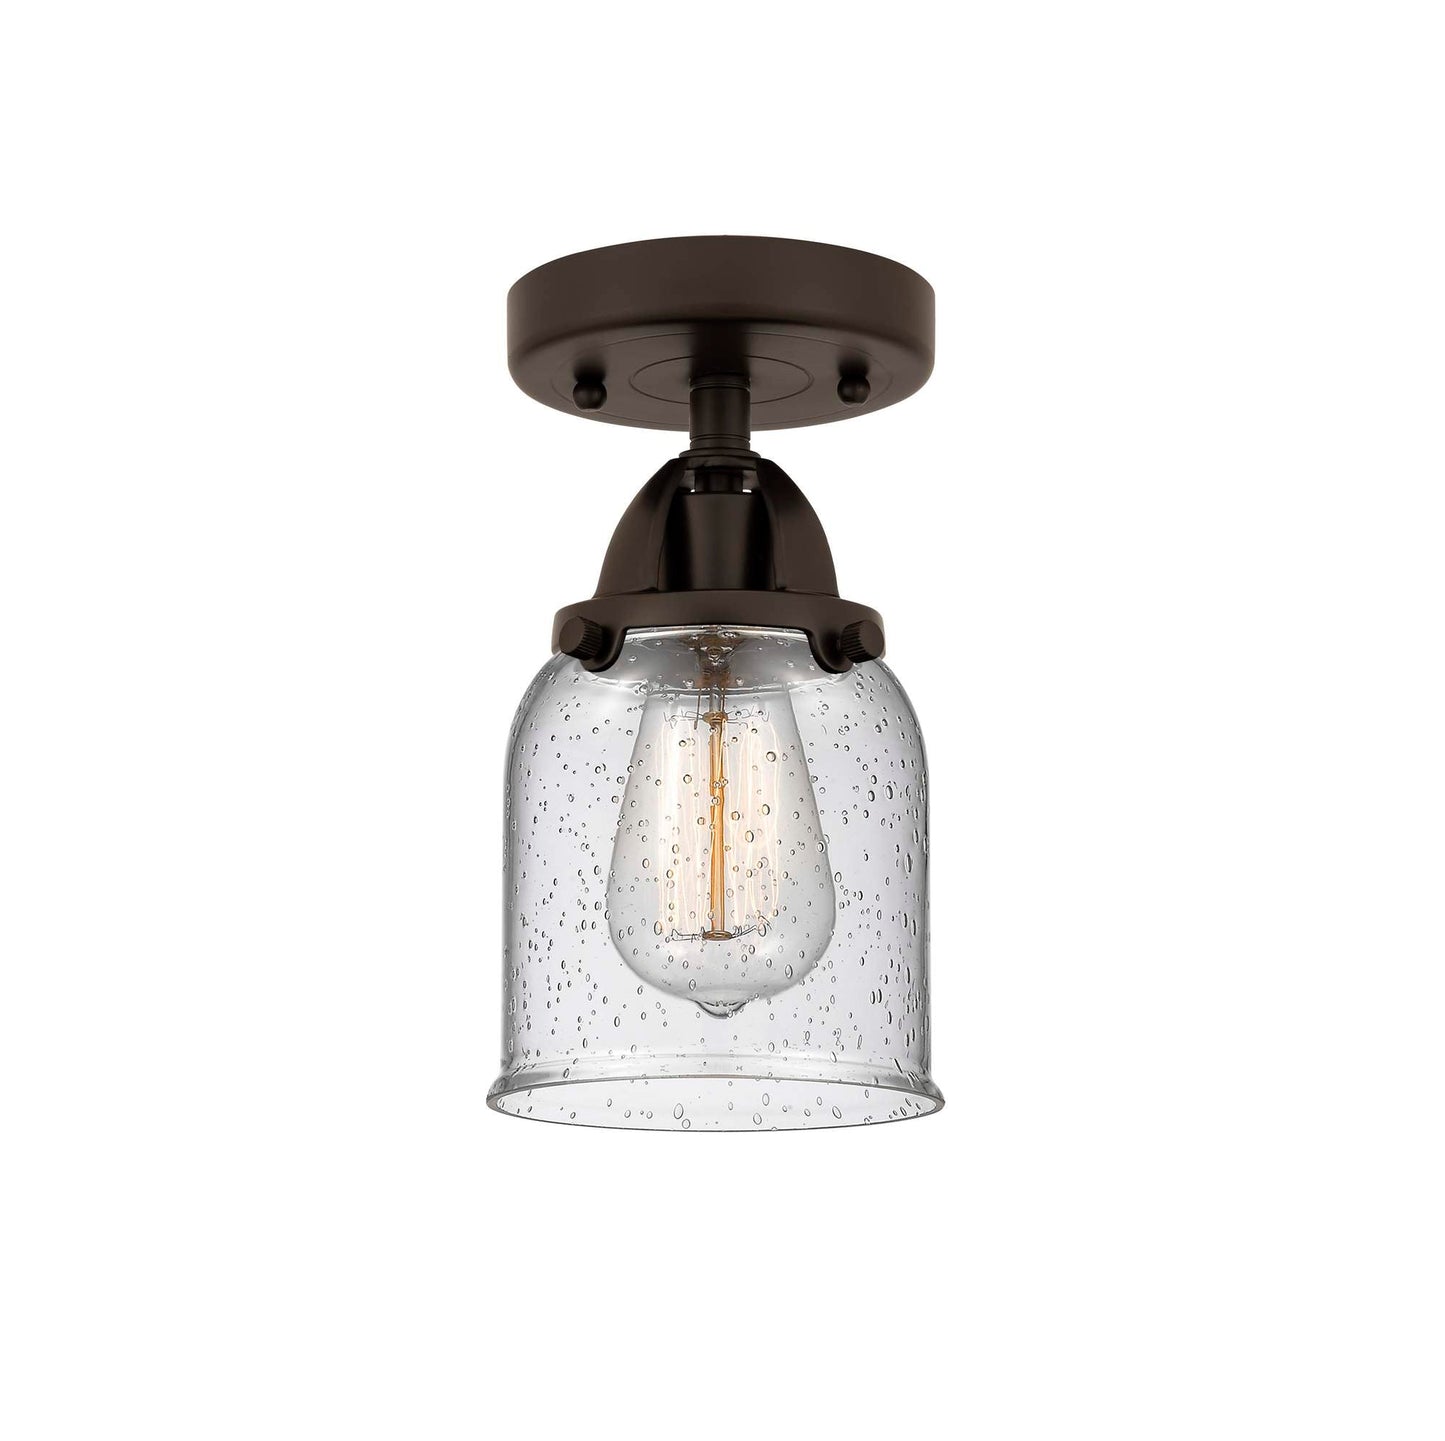 288-1C-OB-G54 1-Light 5" Oil Rubbed Bronze Semi-Flush Mount - Seedy Small Bell Glass - LED Bulb - Dimmensions: 5 x 5 x 9.25 - Sloped Ceiling Compatible: No